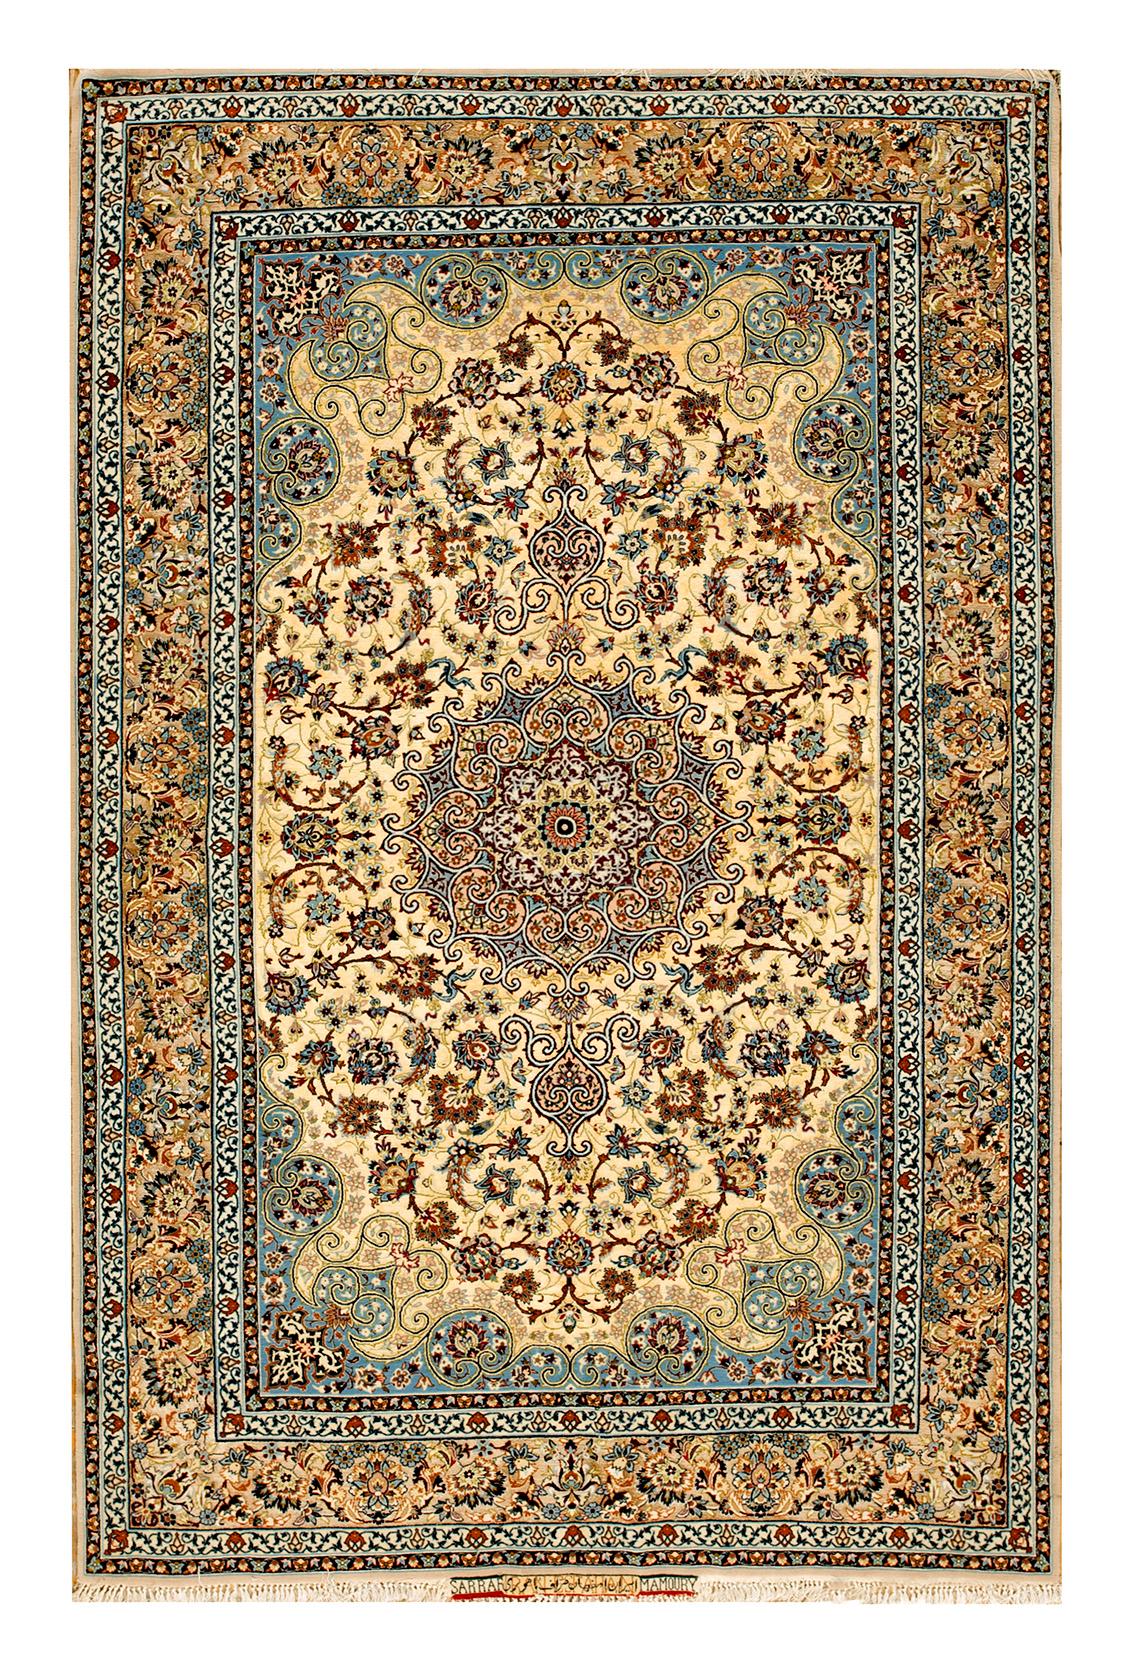 Mid 20th Century Persian Isfahan Carpet by "Sarraf Mamoury" (5' x 8'-153 x 243) For Sale